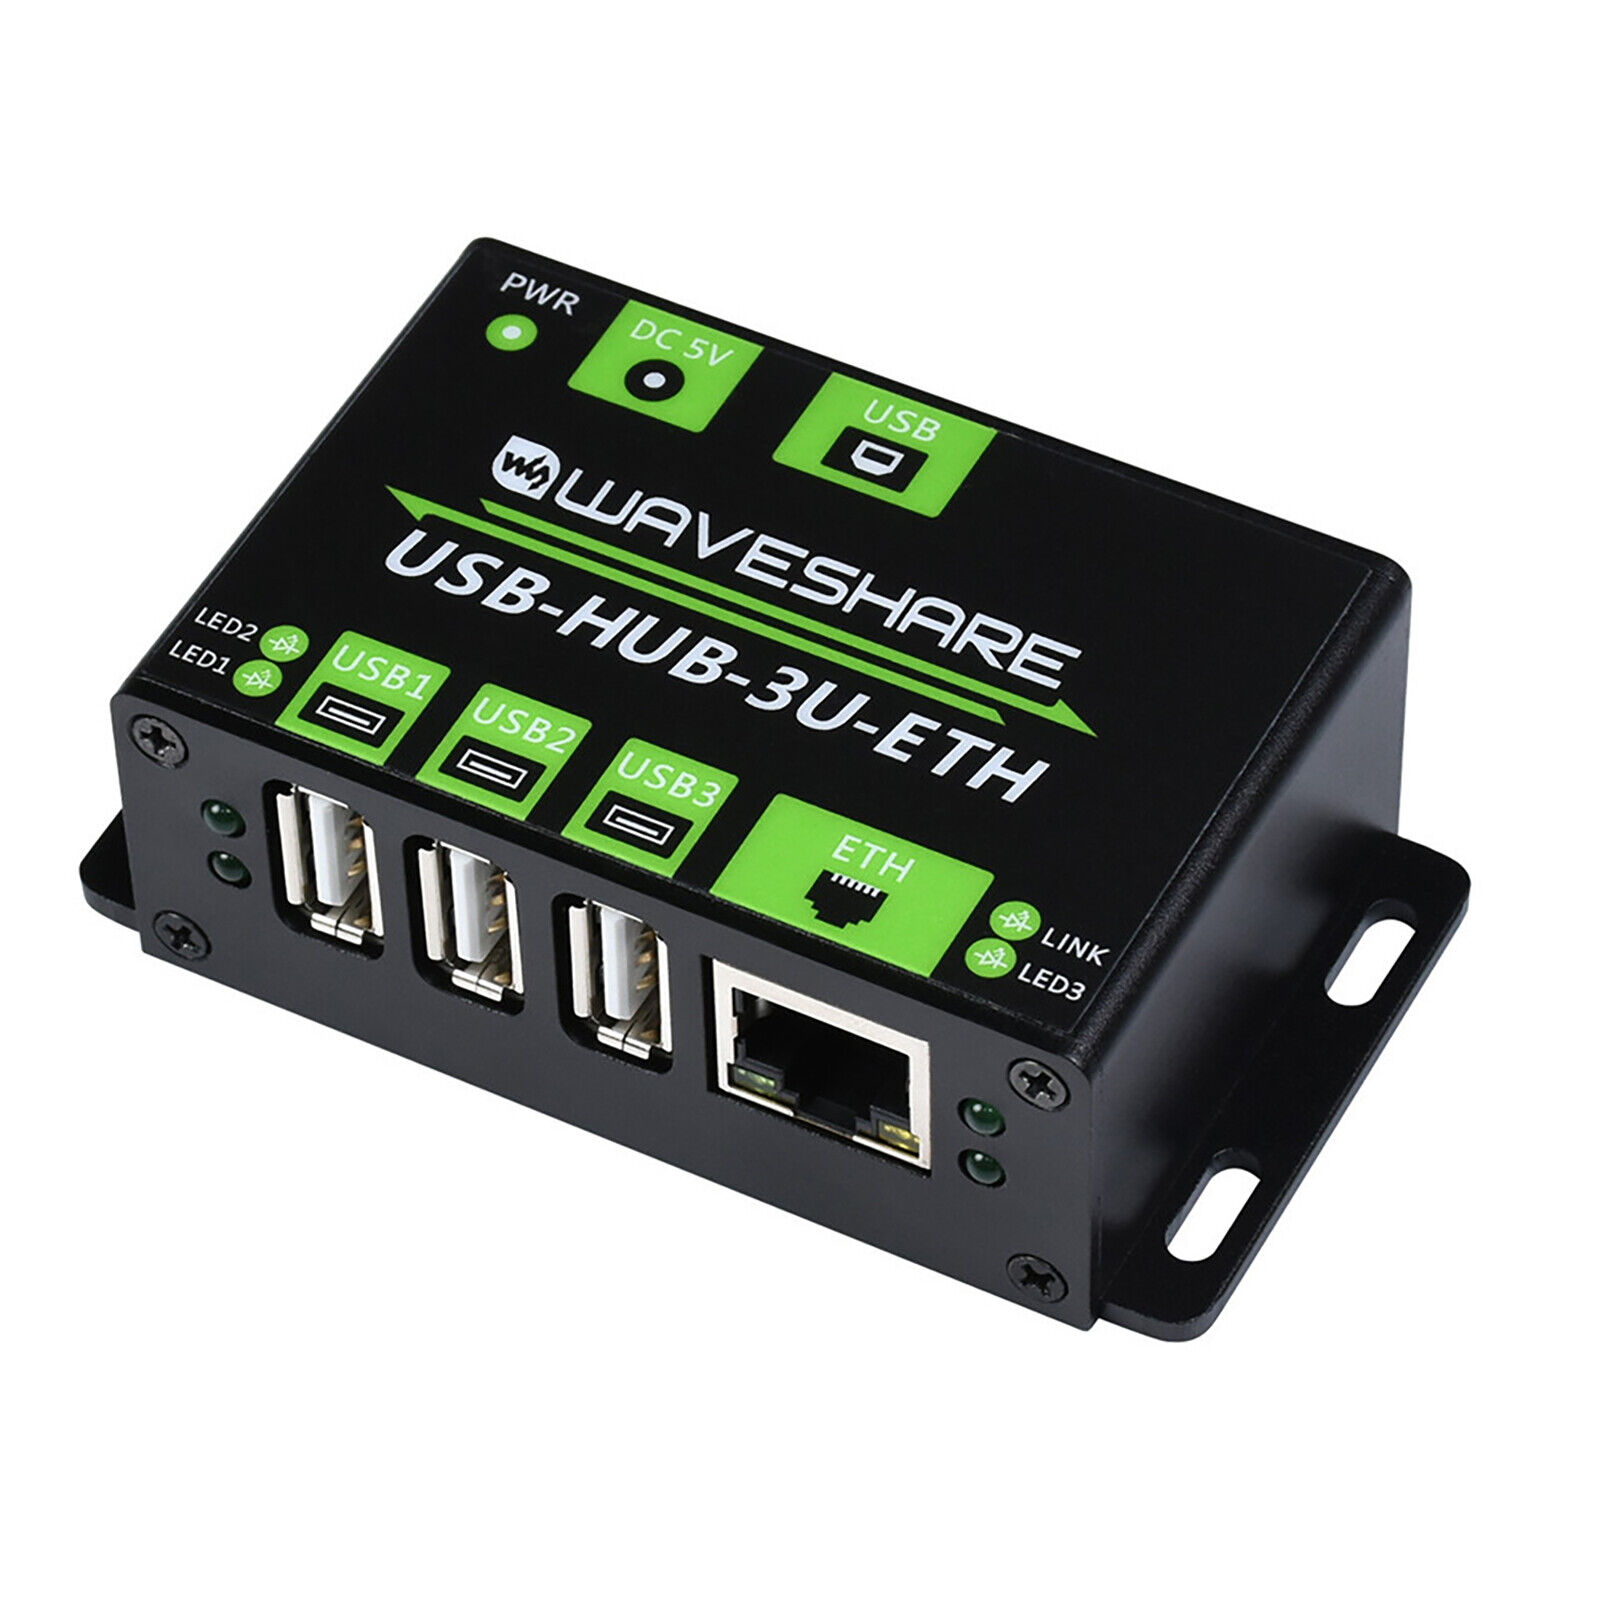 3 Way USB HUB With 100M Ethernet Port Connector Industrial Grade Extension Board